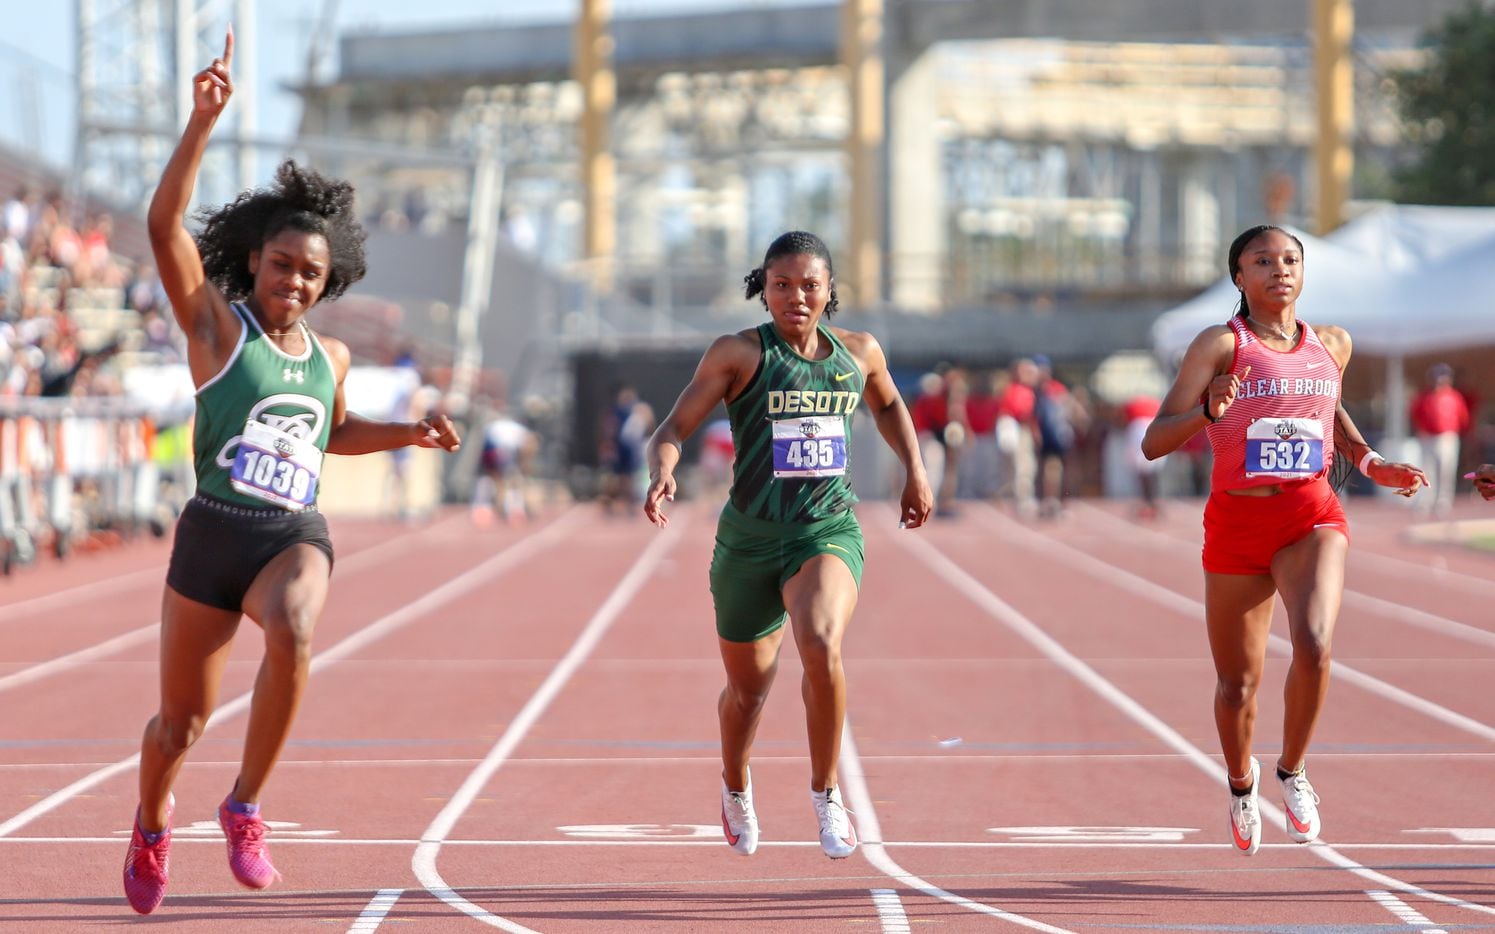 DeSoto's Ja'Era Griffin (center) places fifth during her 6A Girls 100 meter run at the UIL state track meet at the Mike A. Myers Stadium, at the University of Texas on May 8, 2021 in Austin, Texas. Jasmine Montgomery of San Antonio Reagan (left) won first place.